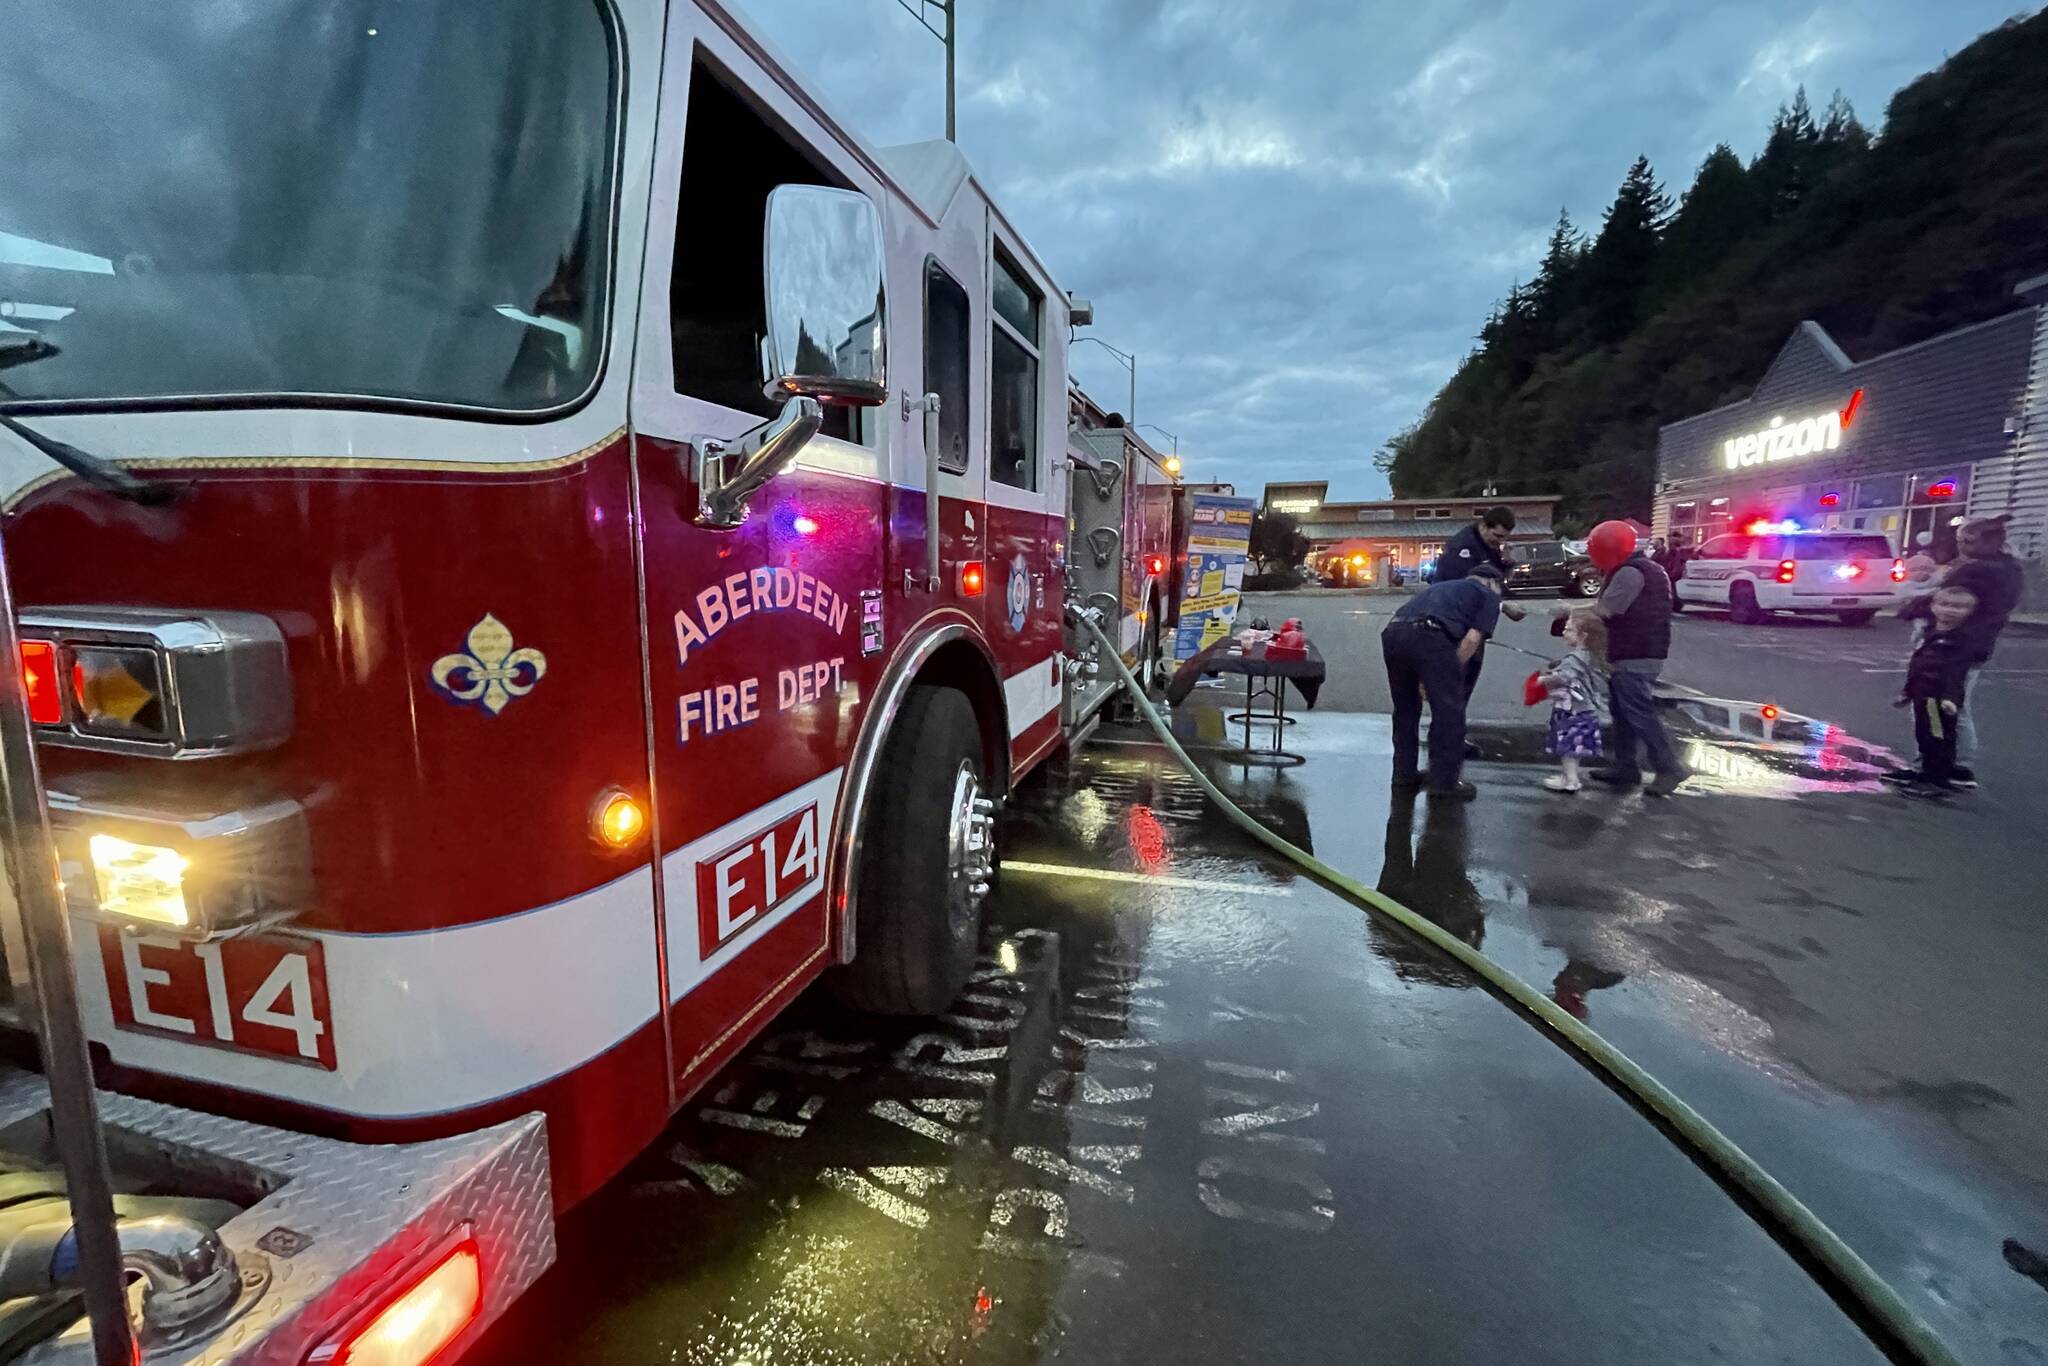 The Aberdeen Fire Department demonstrated spraying down a target at Badges and Brews, hosted at Starbucks on Sept. 22, 2022. (Michael S. Lockett / The Daily World File)